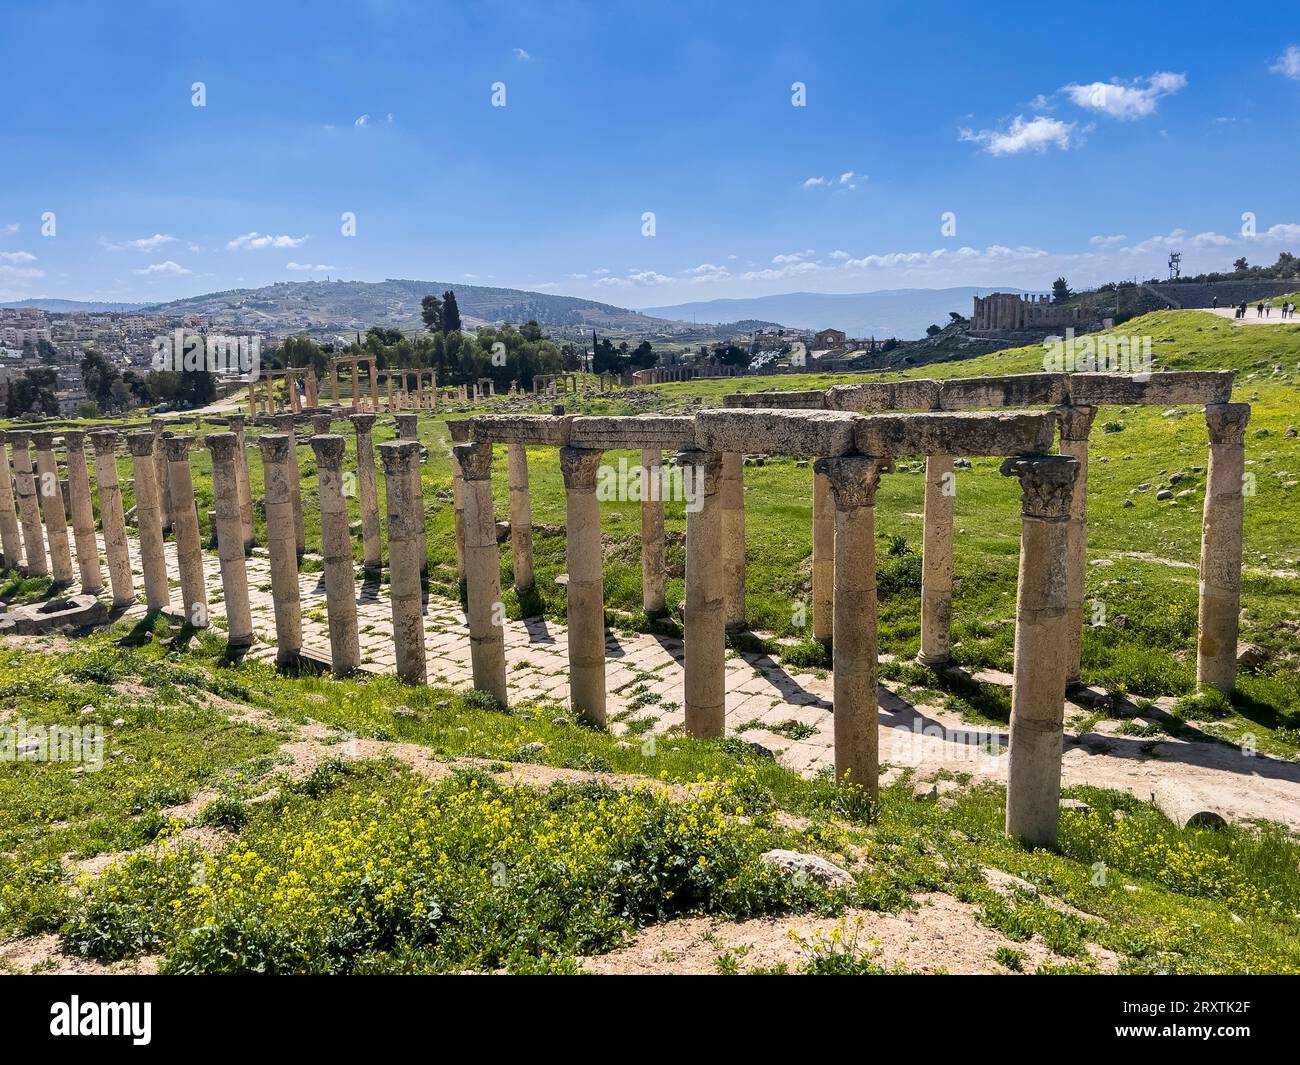 Columns line a street in the ancient city of Jerash, believed to be founded in 331 BC by Alexander the Great, Jerash, Jordan, Middle East Stock Photo